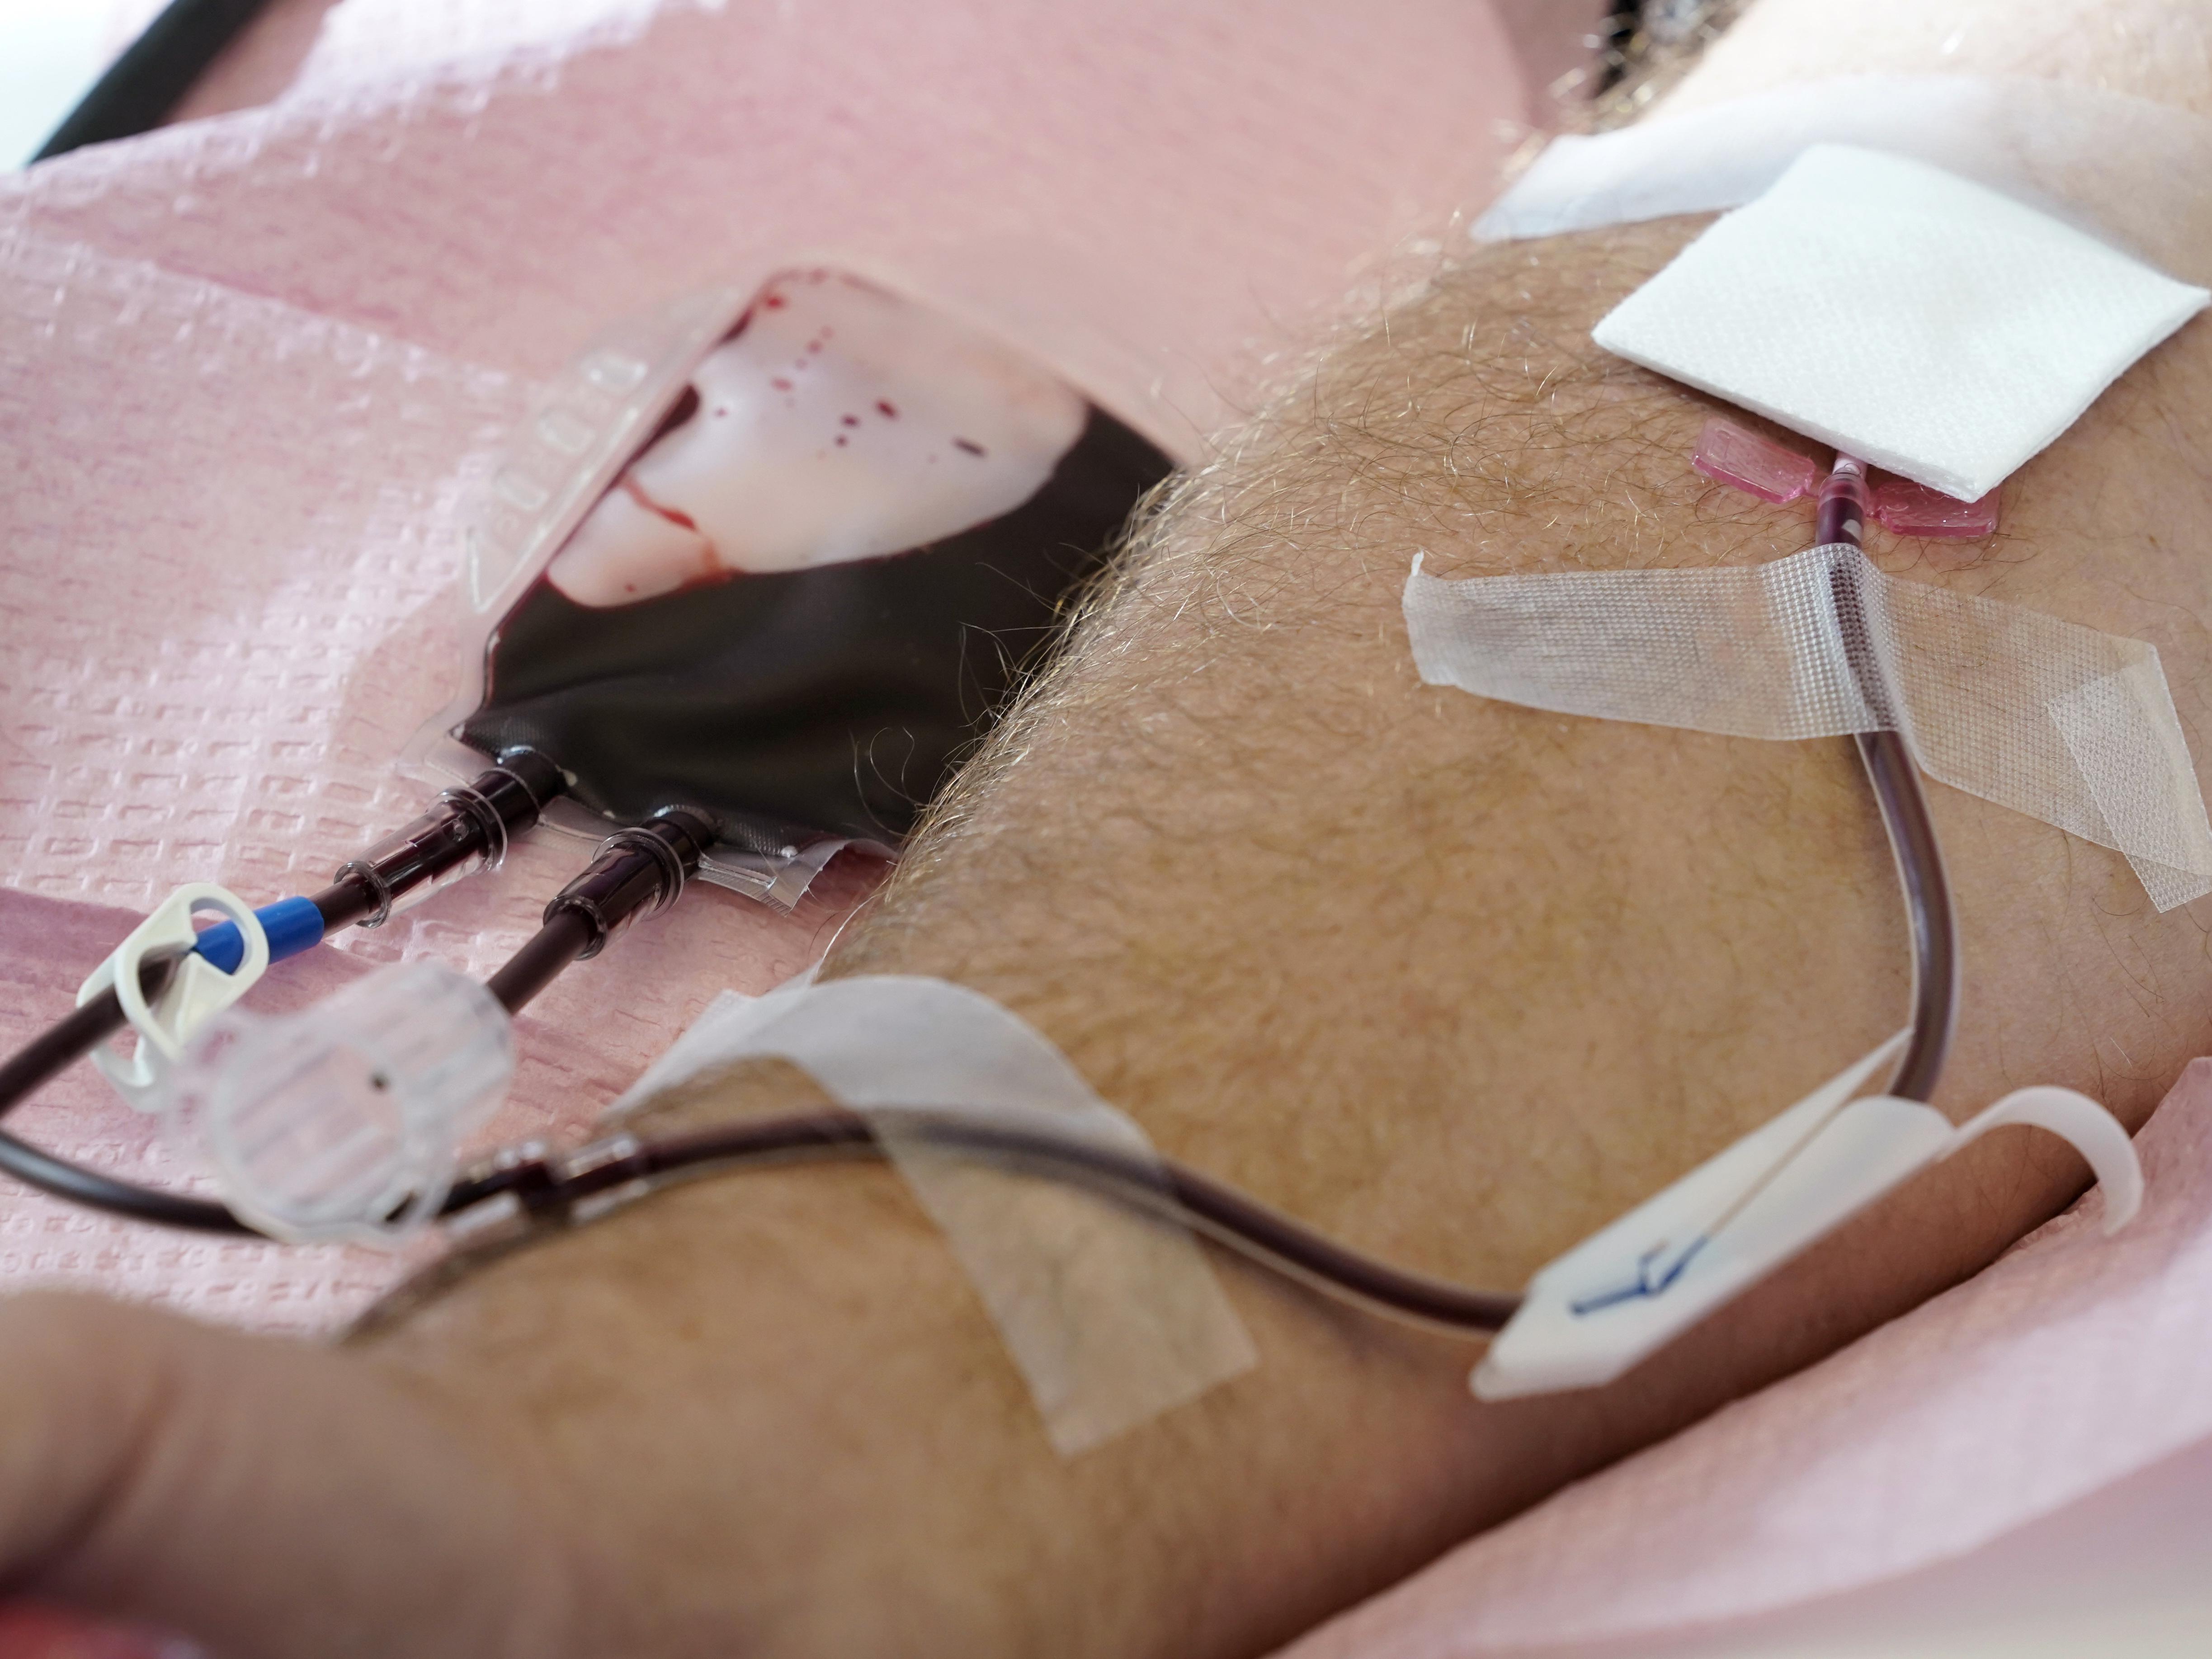 FDA Changes Blood Donor Eligibility for Gay, Bisexual Men | The Loneliness  Epidemic | â€œBest of Insightâ€ Mariachi Bonitas - capradio.org